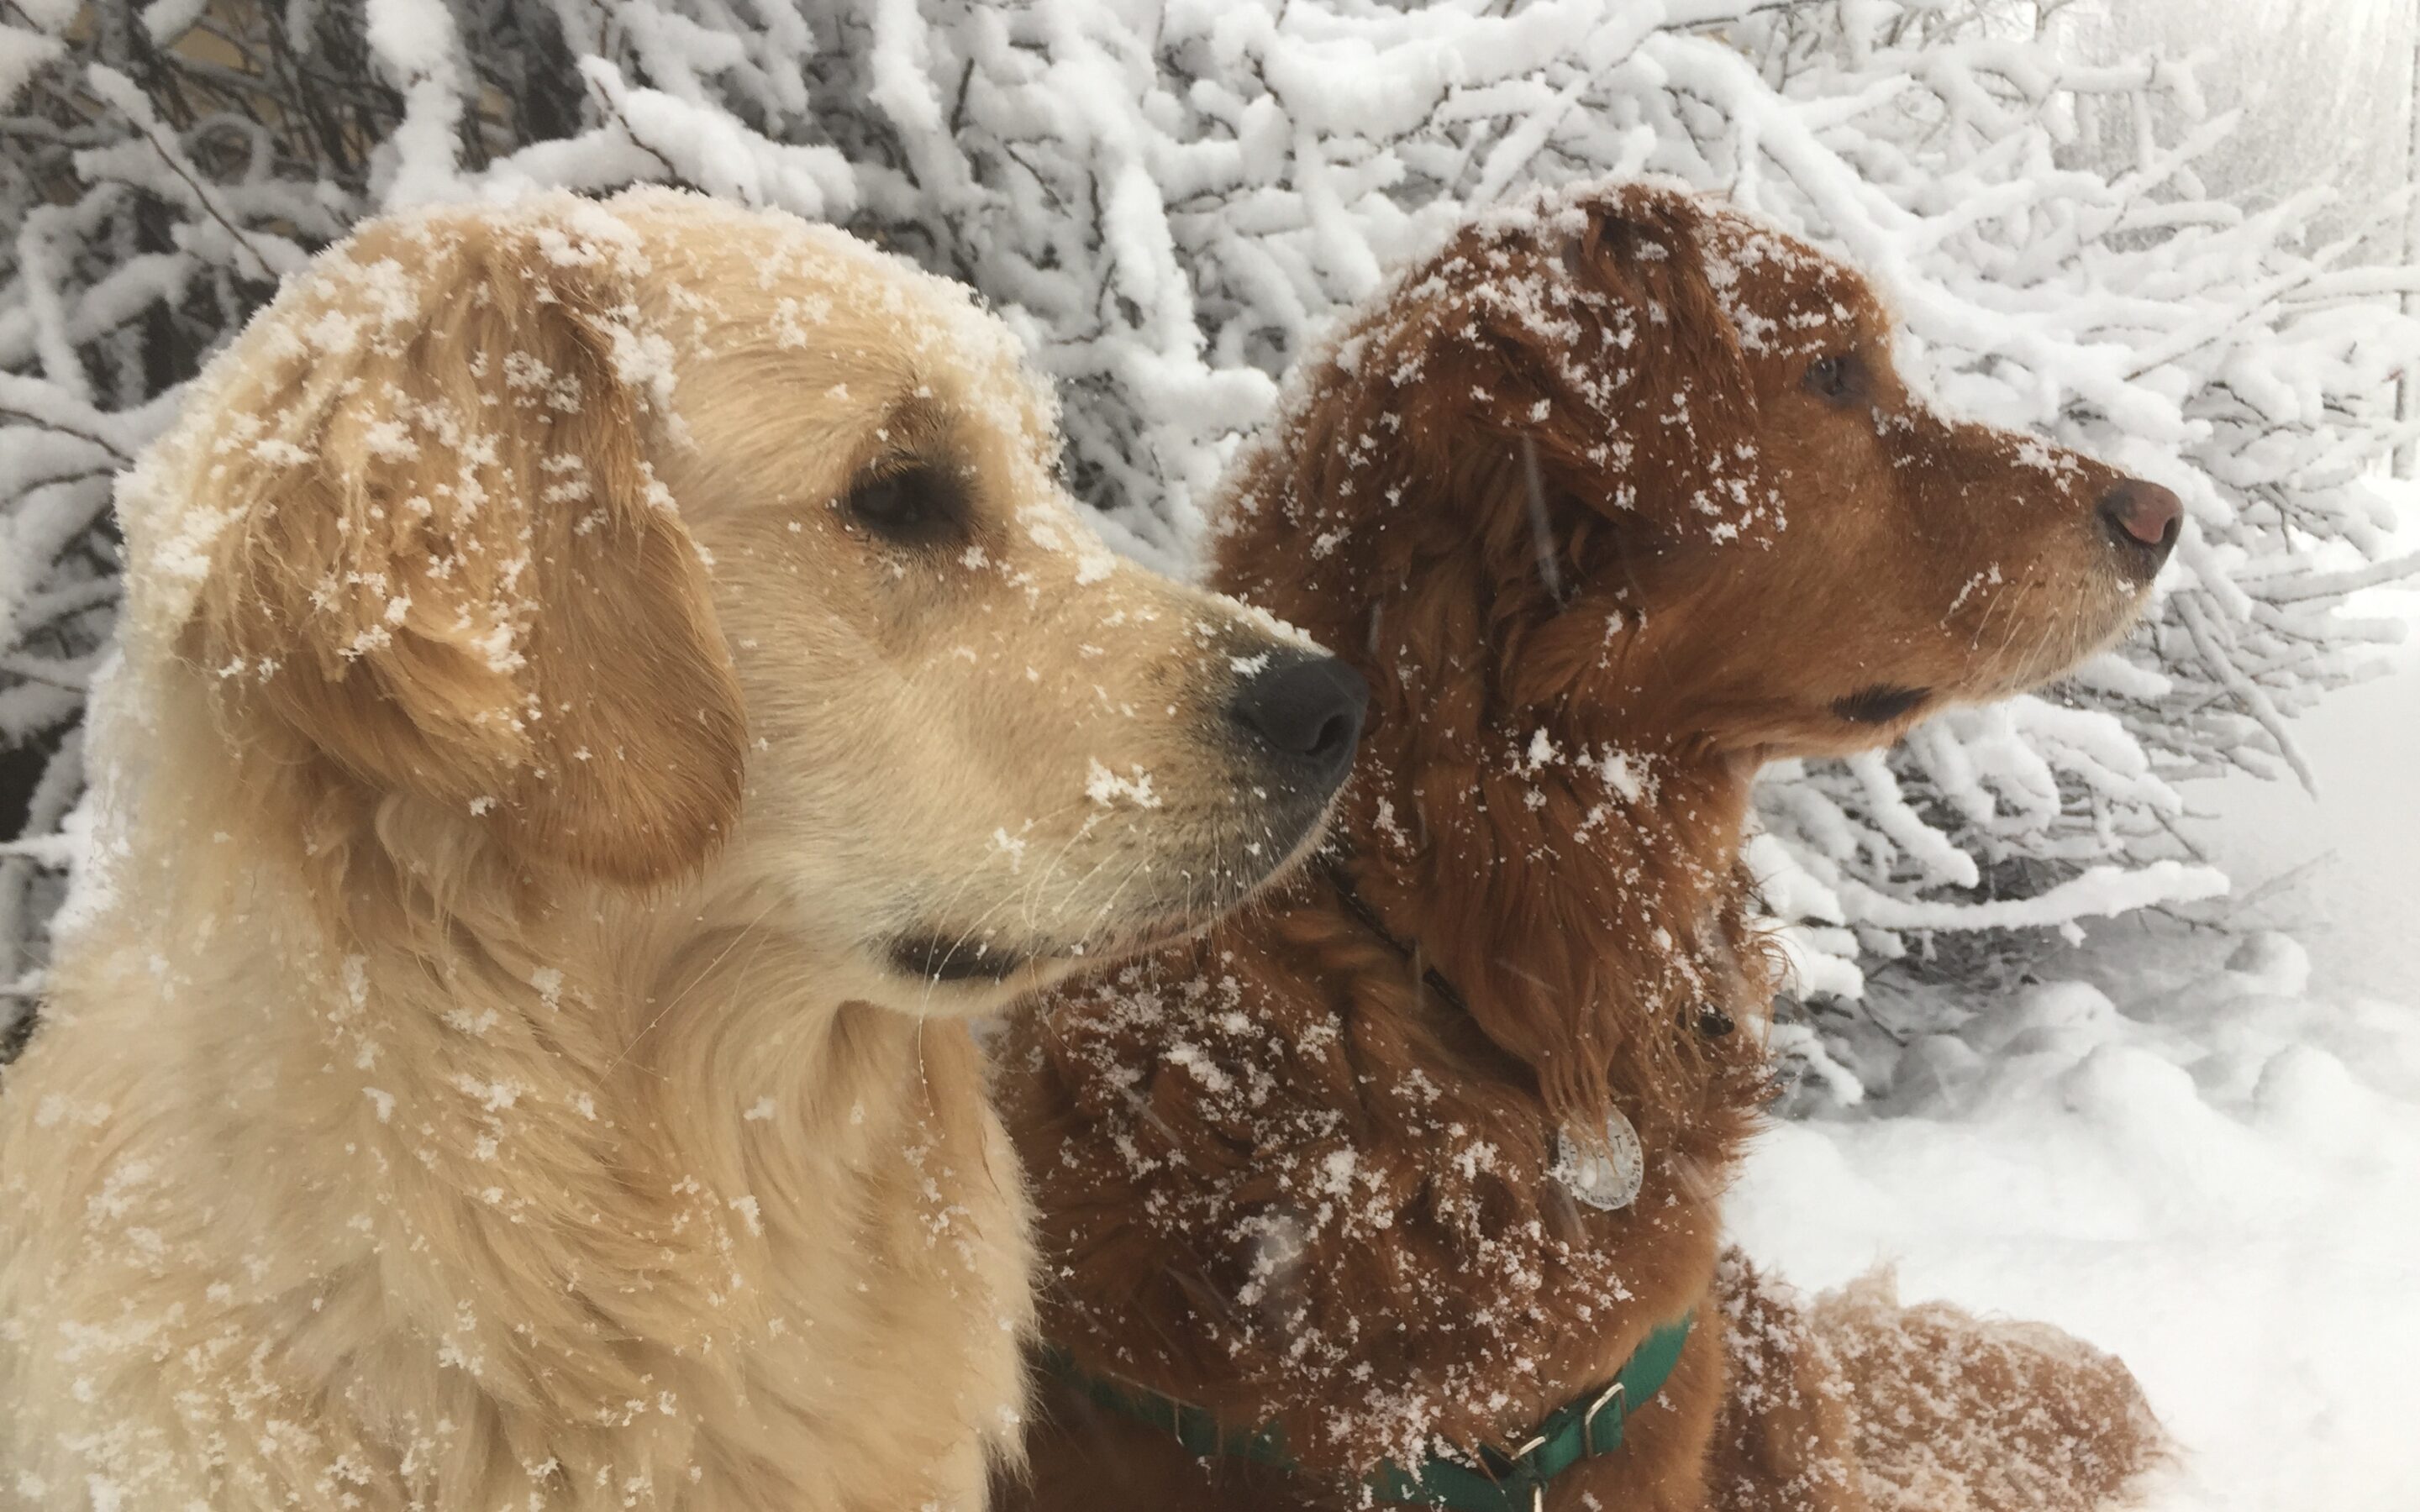 Let’s WOOF about animals enjoying snow.